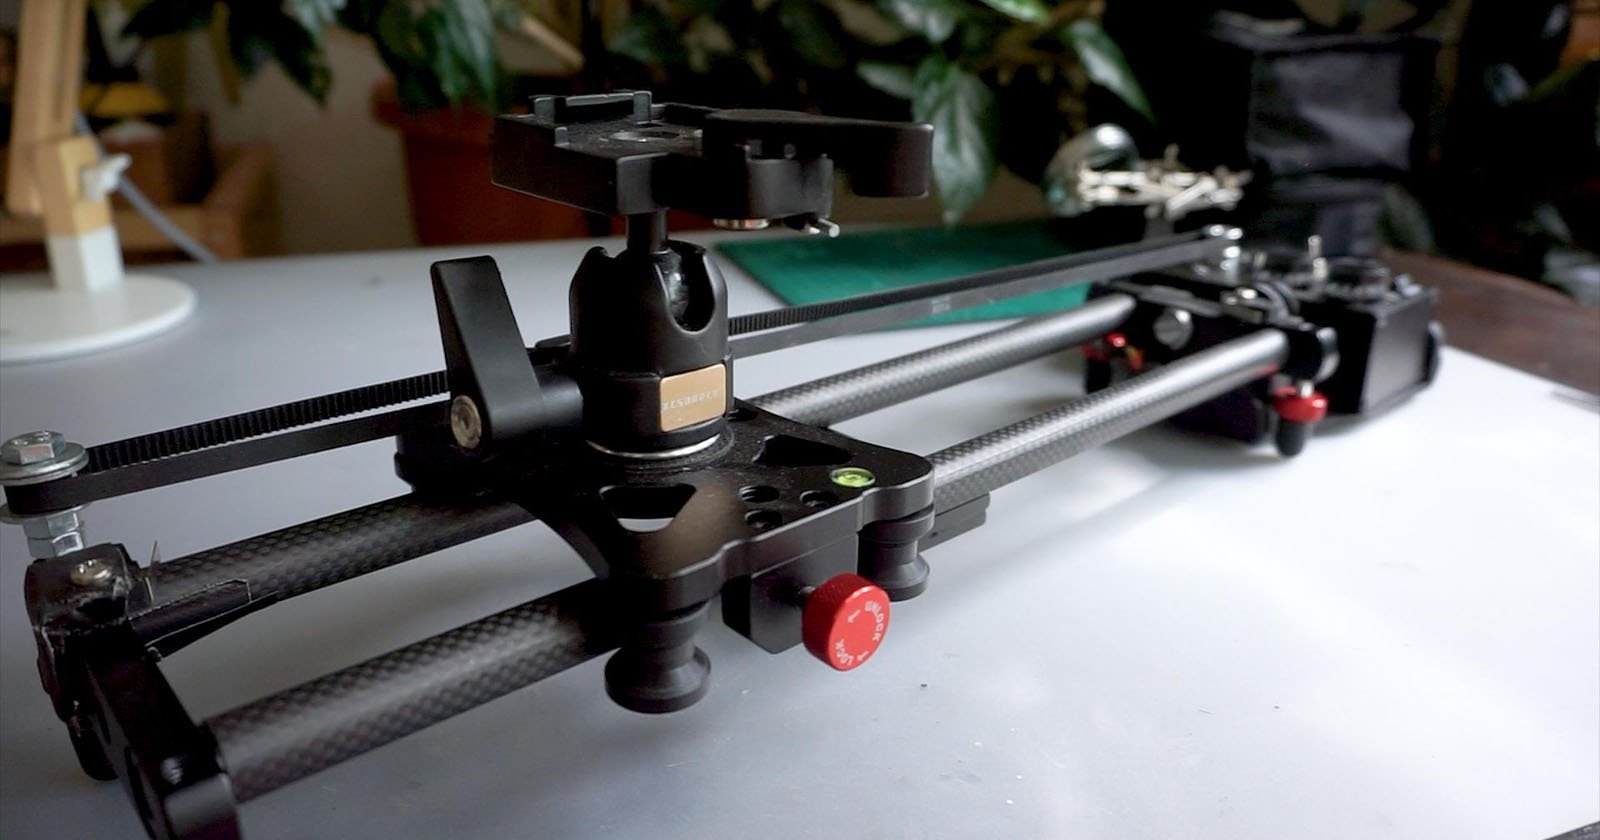 Filmmaker Shows How to Add a DIY Motor to a Basic Camera Slider